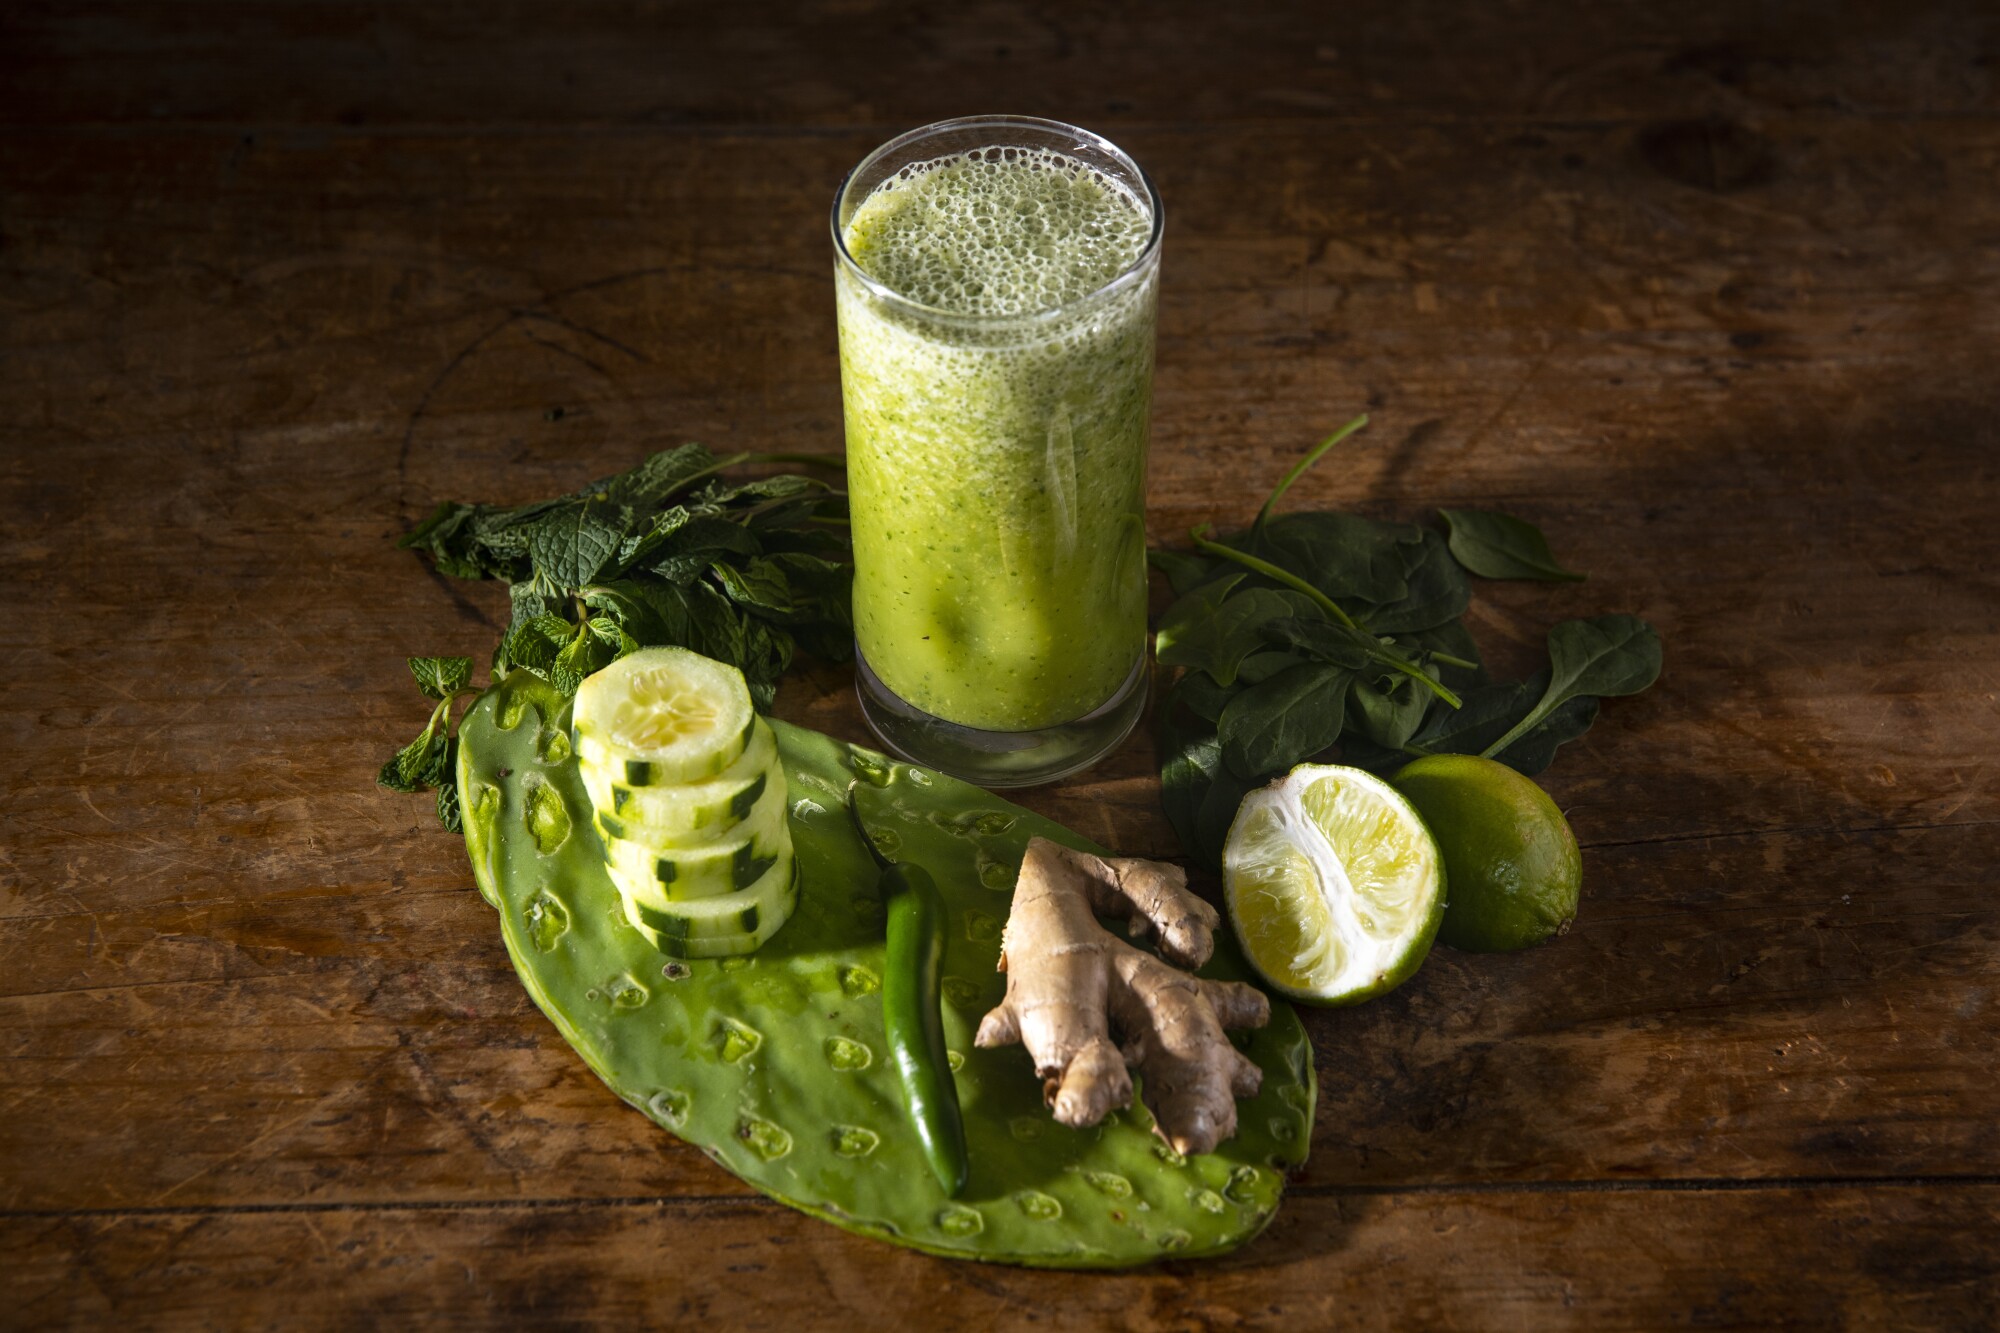 If you're watching your intake of natural sugars, opt for green juices from health food stores - these are high in vegetables.